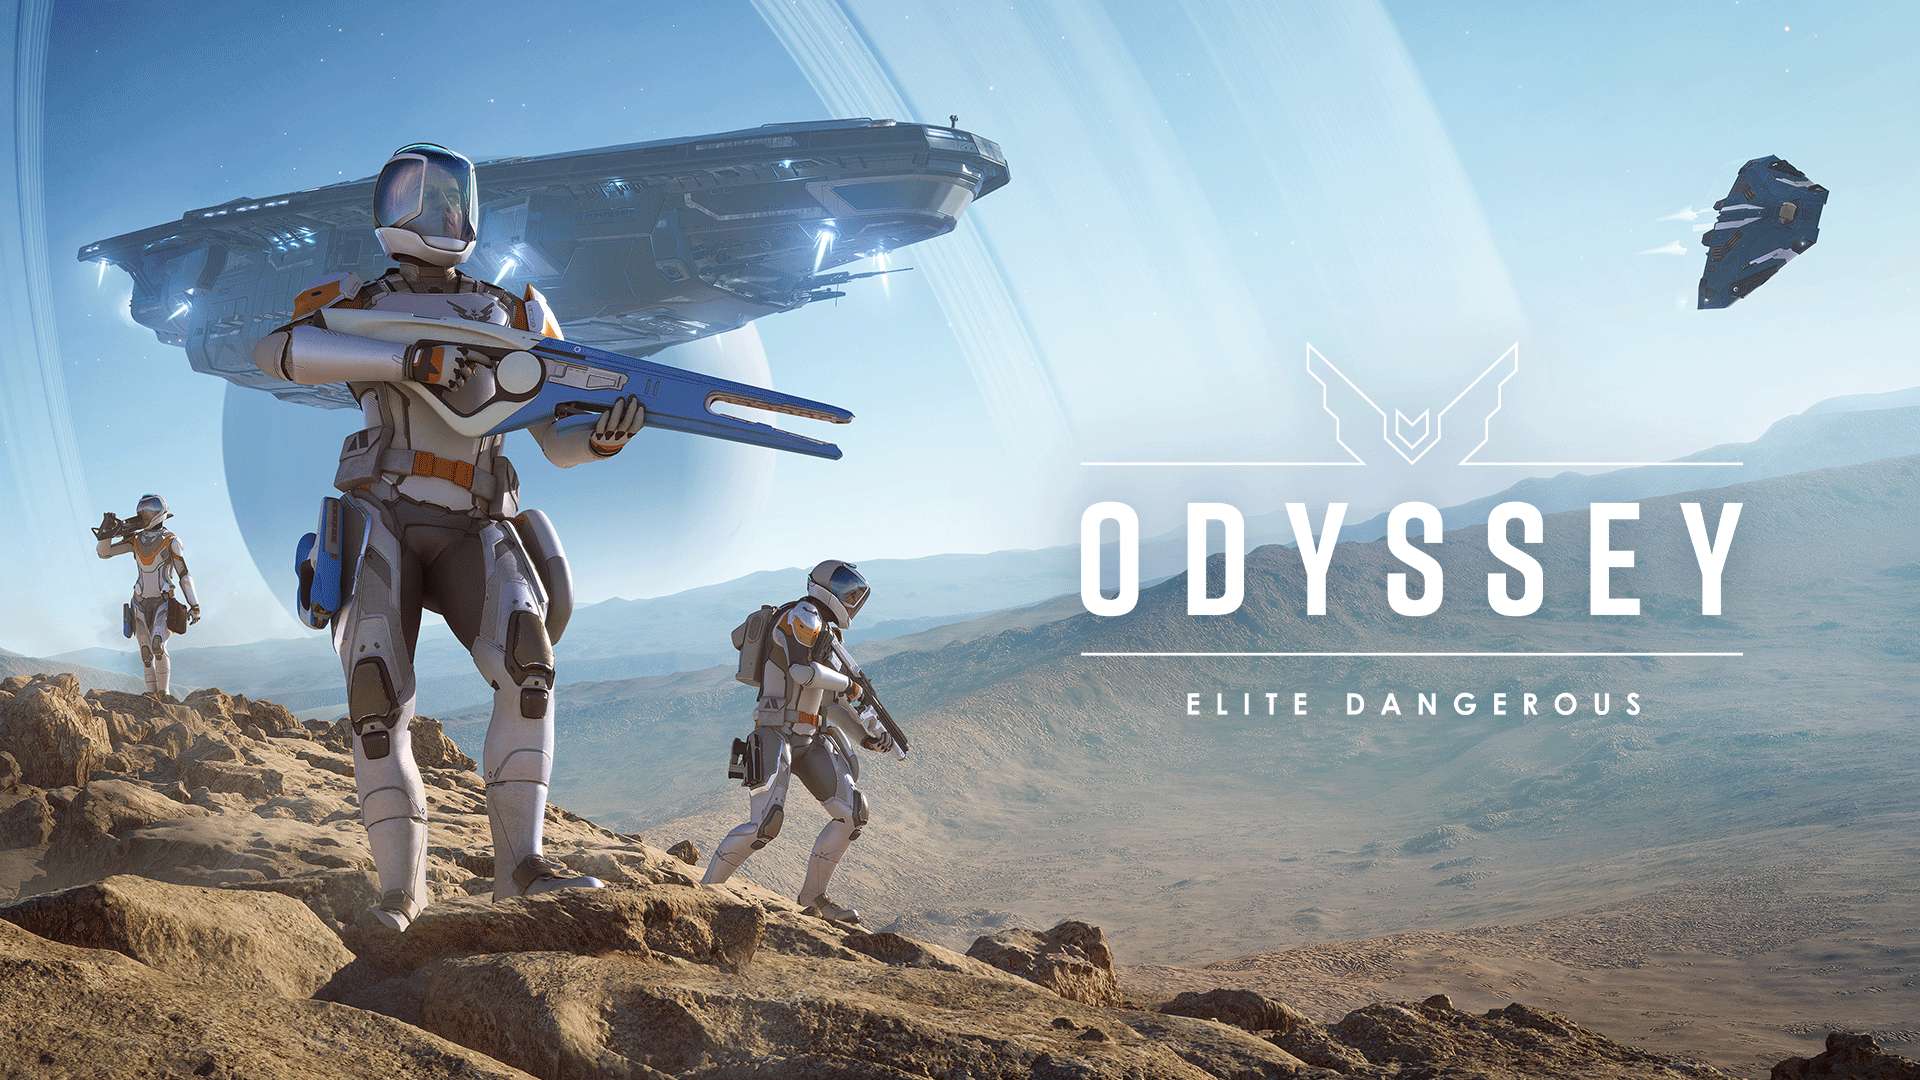 Elite Dangerous: Odyssey Is Actually Just Broken, 3,000+ Negative Steam Reviews And Counting